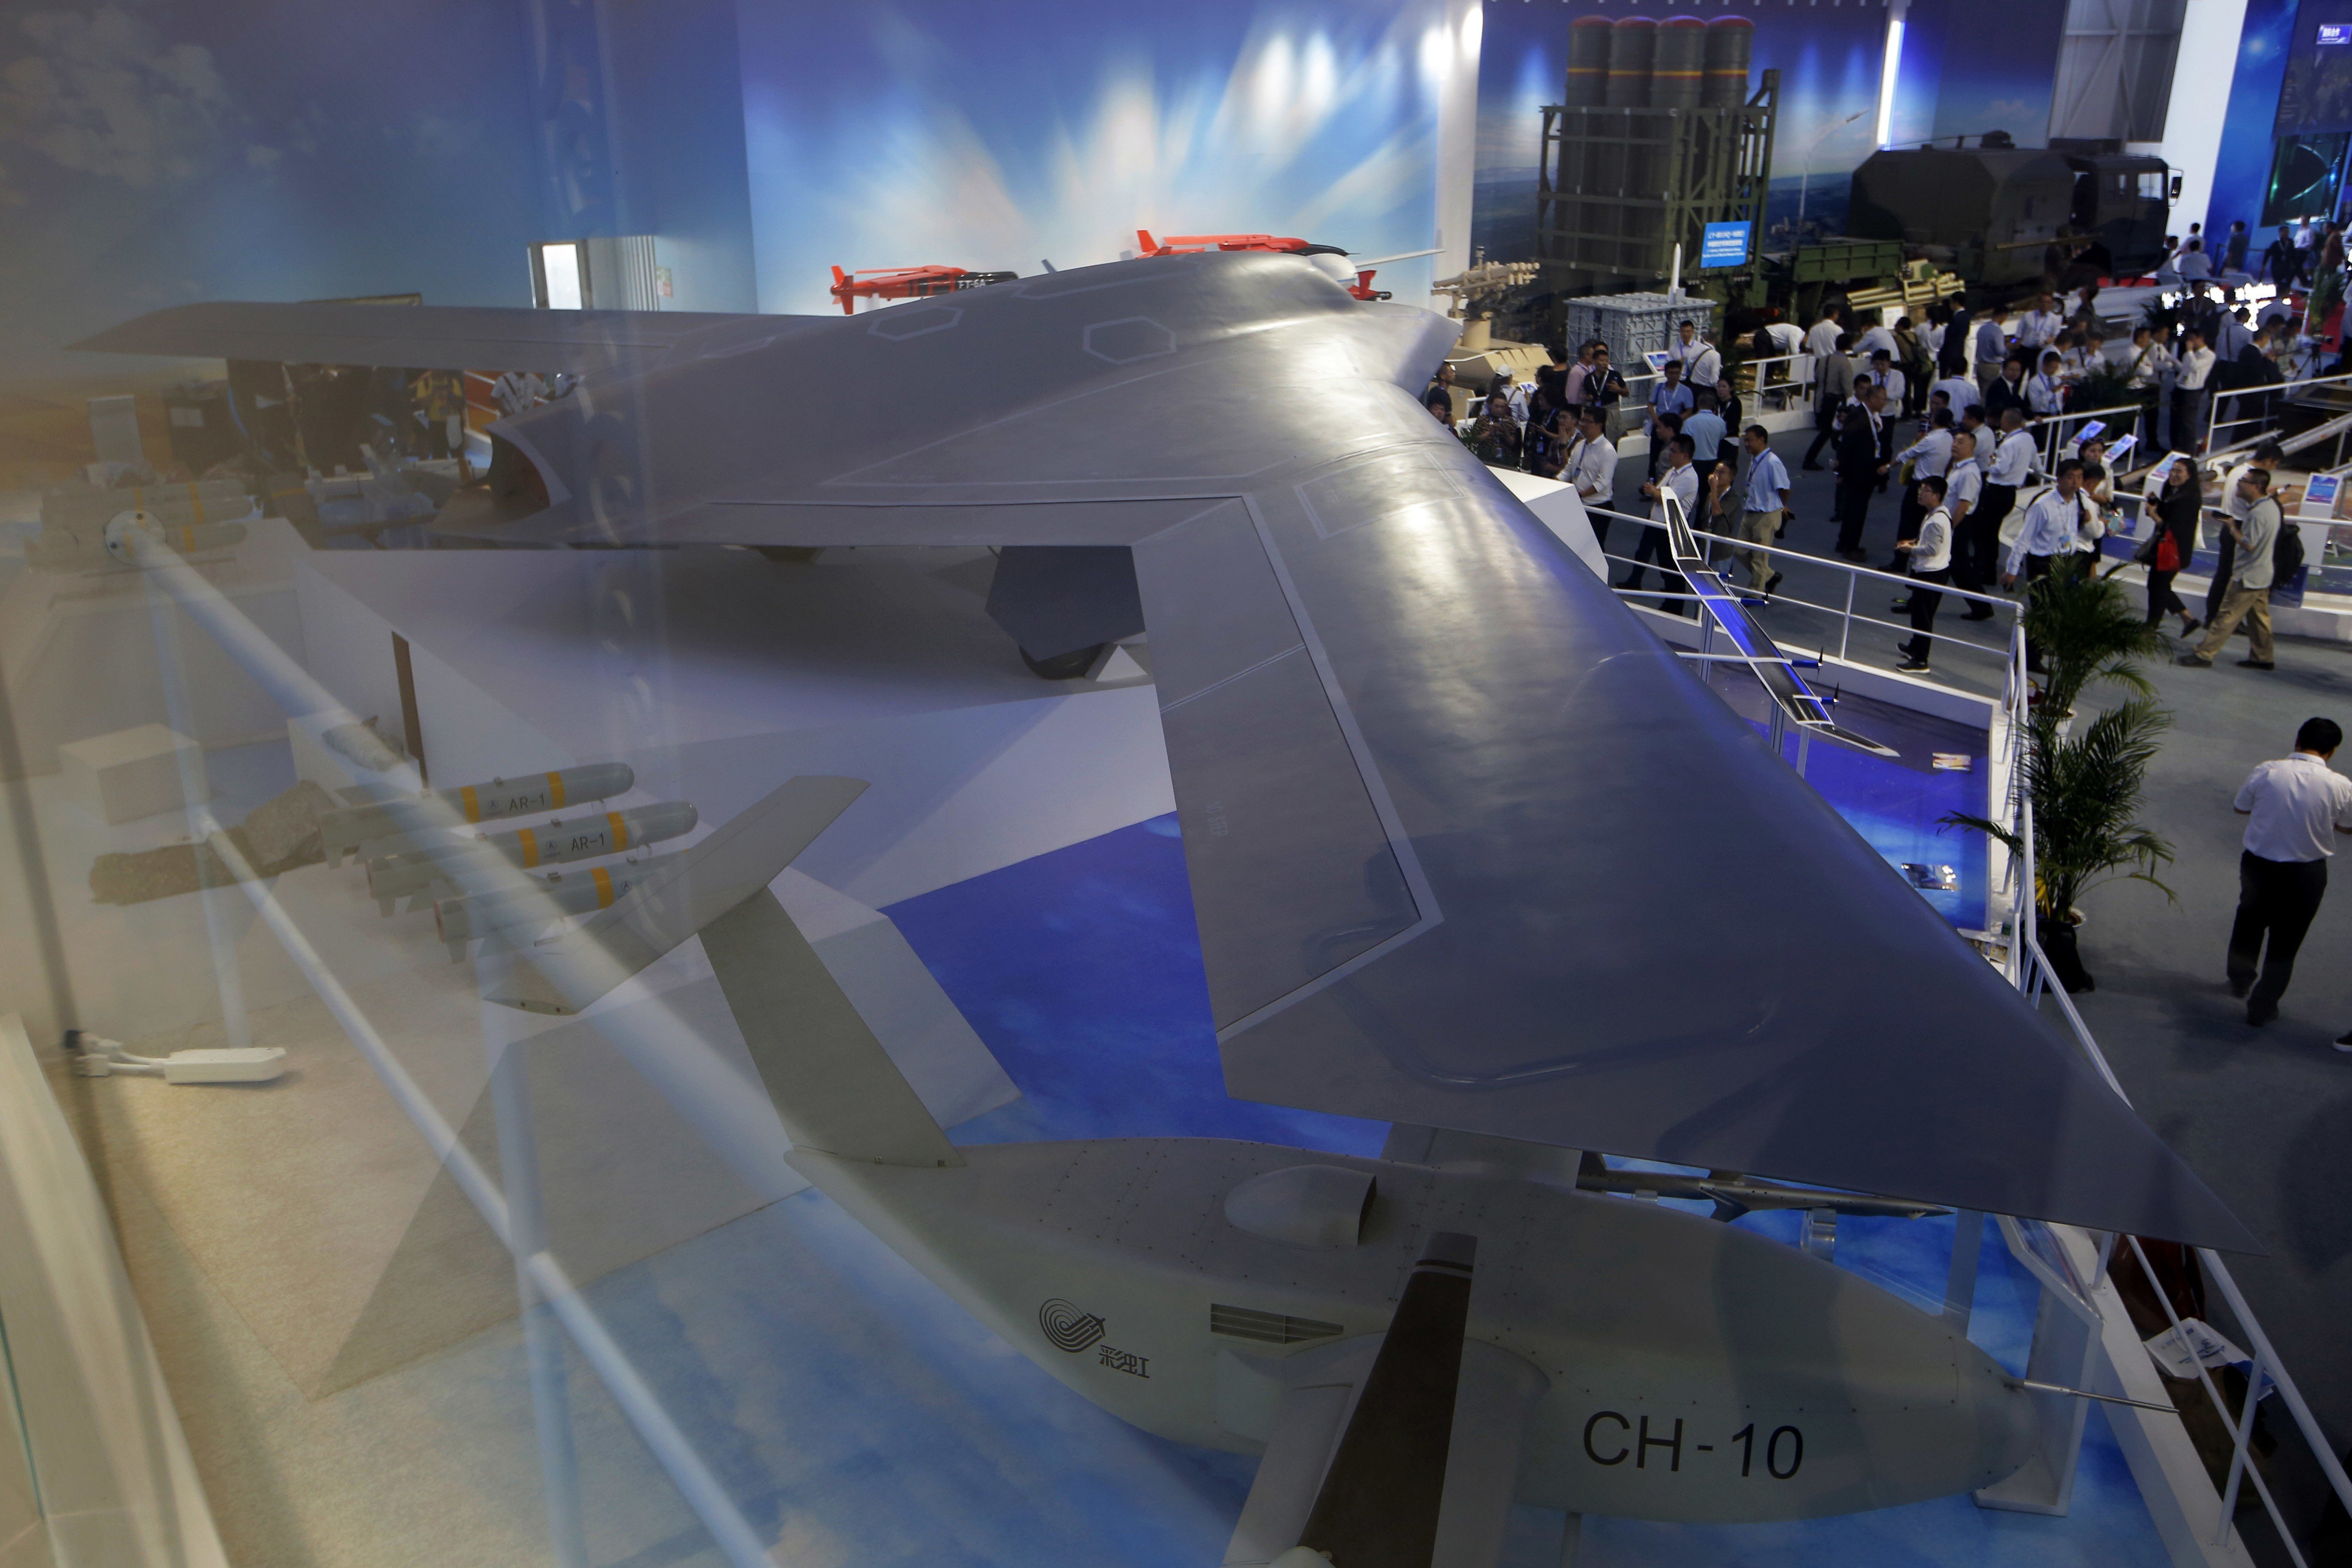 A full-size model of China’s new stealth drone, the CH-7, is on display at Airshow China in Zhuhai. Photo: AP